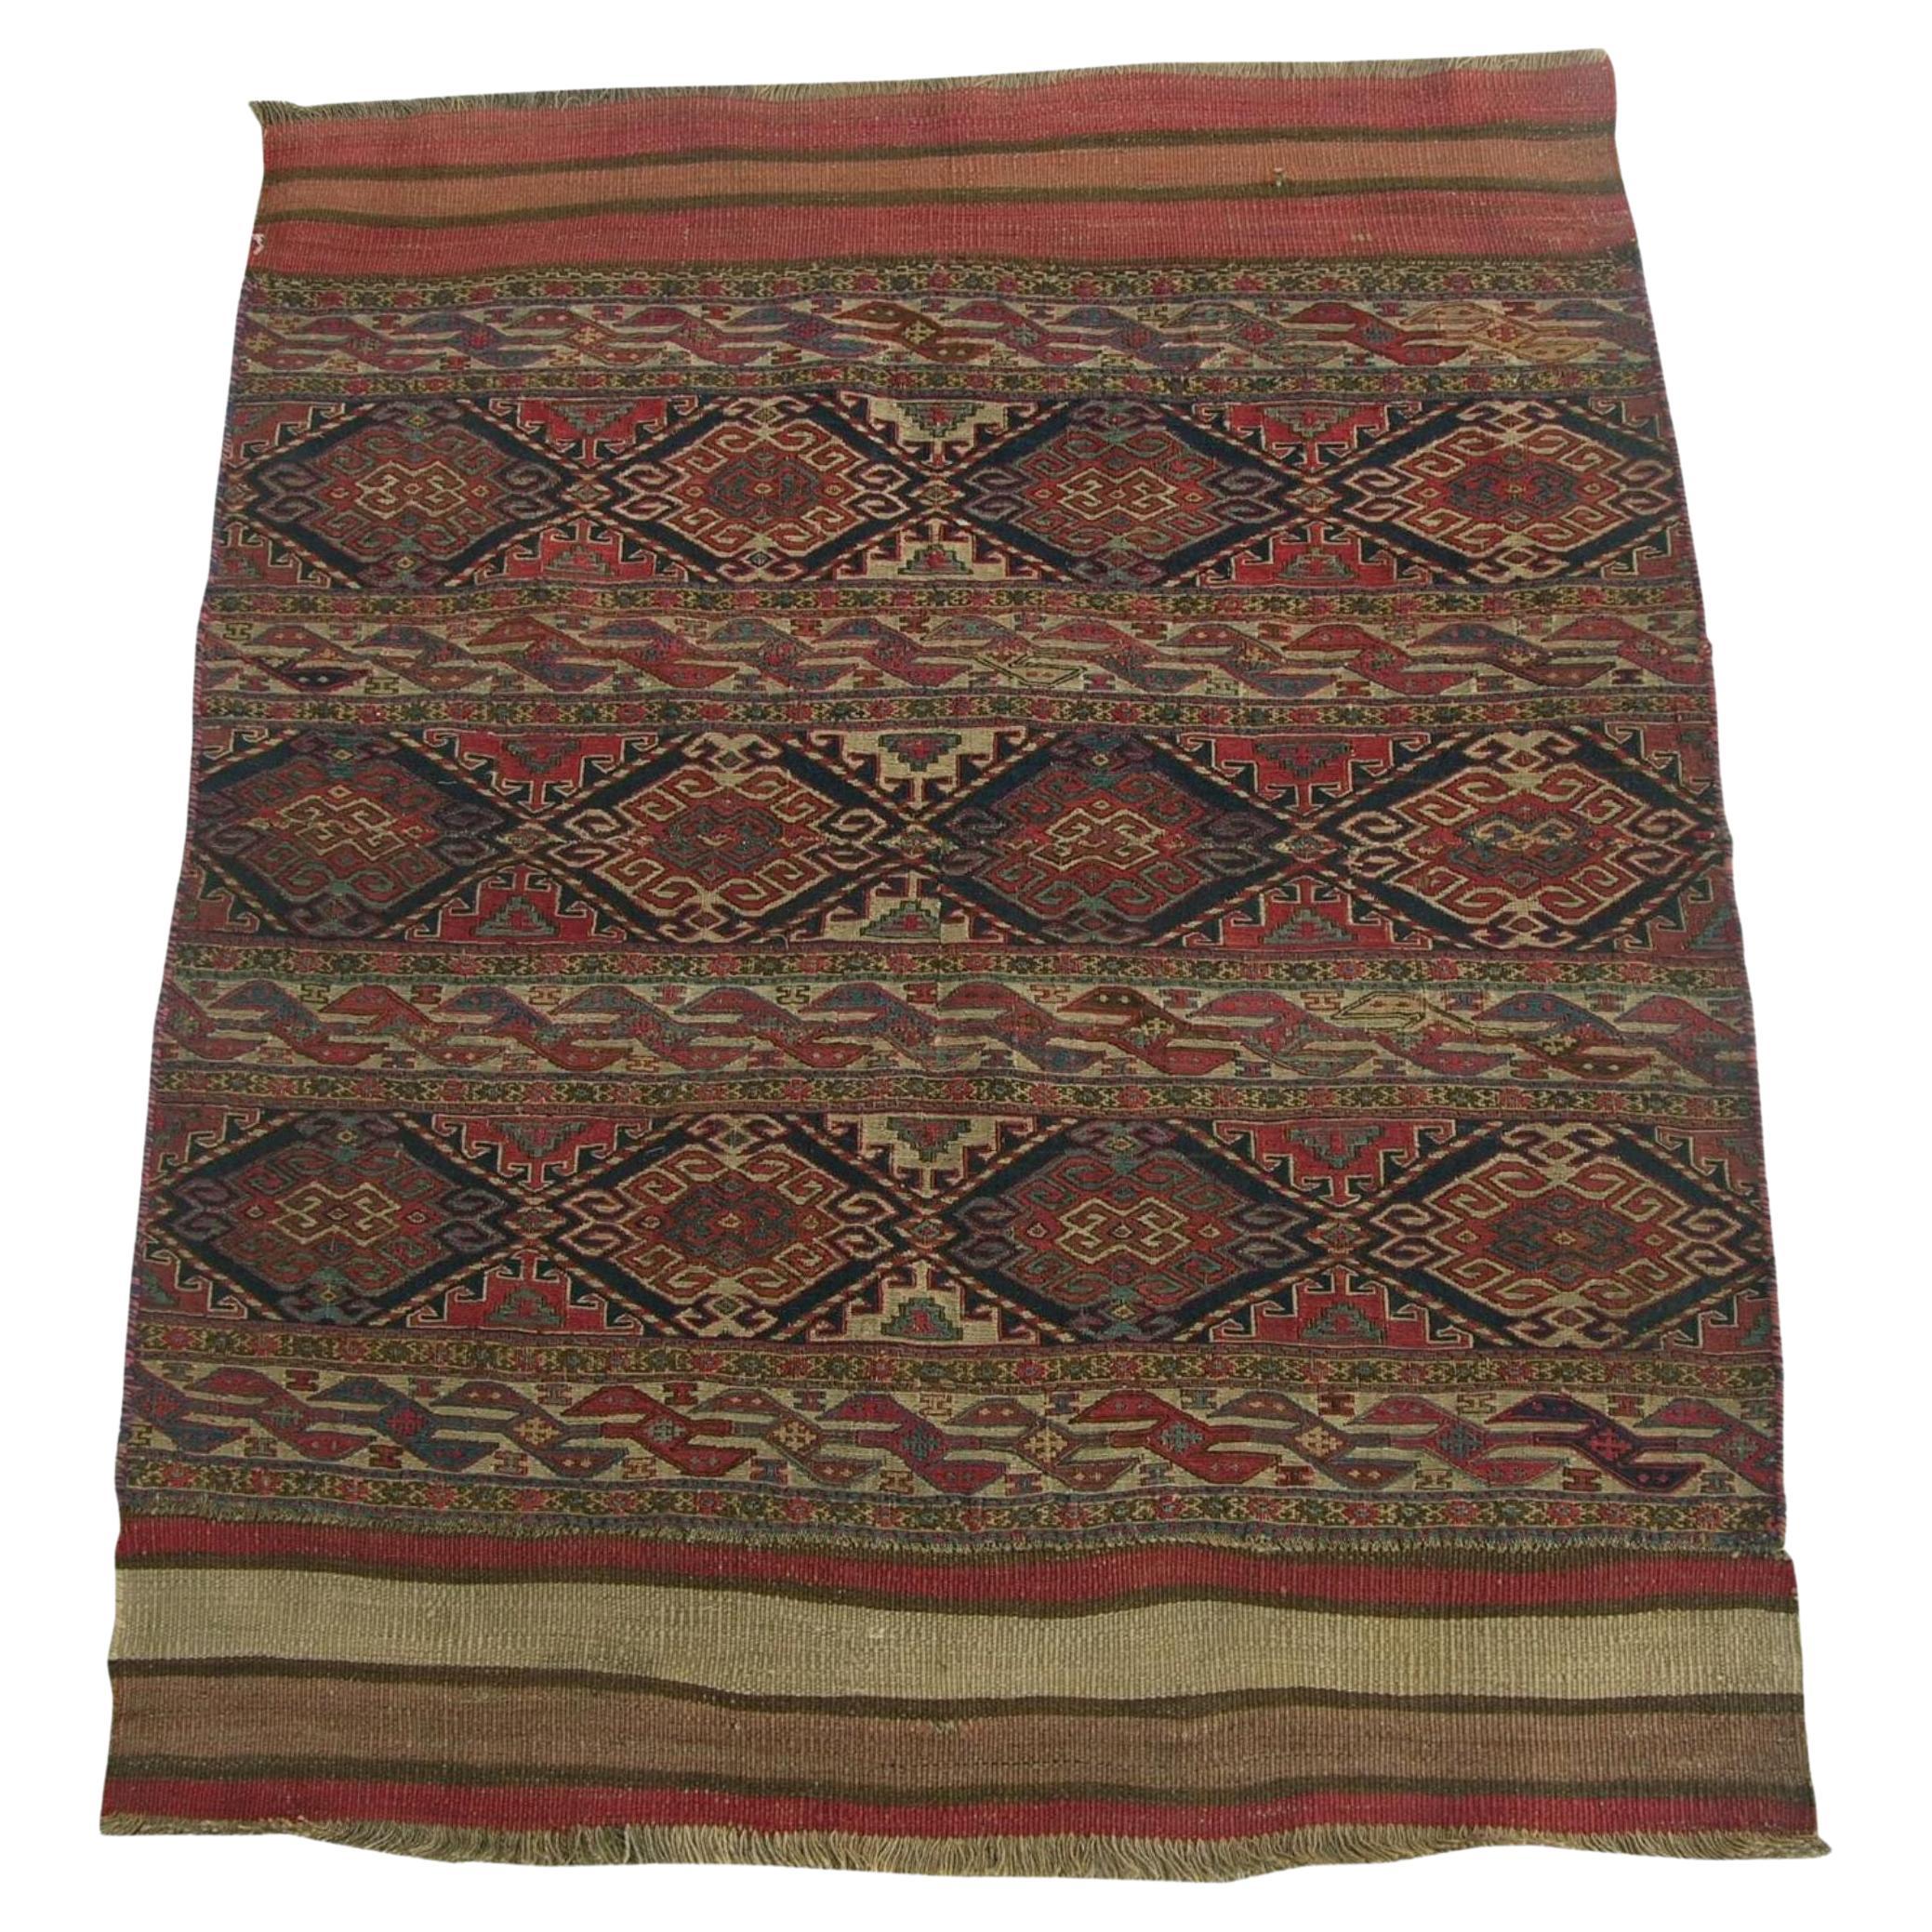 Early 20th Century Antique Shahsavand Fish Design Flat Weave Rug For Sale